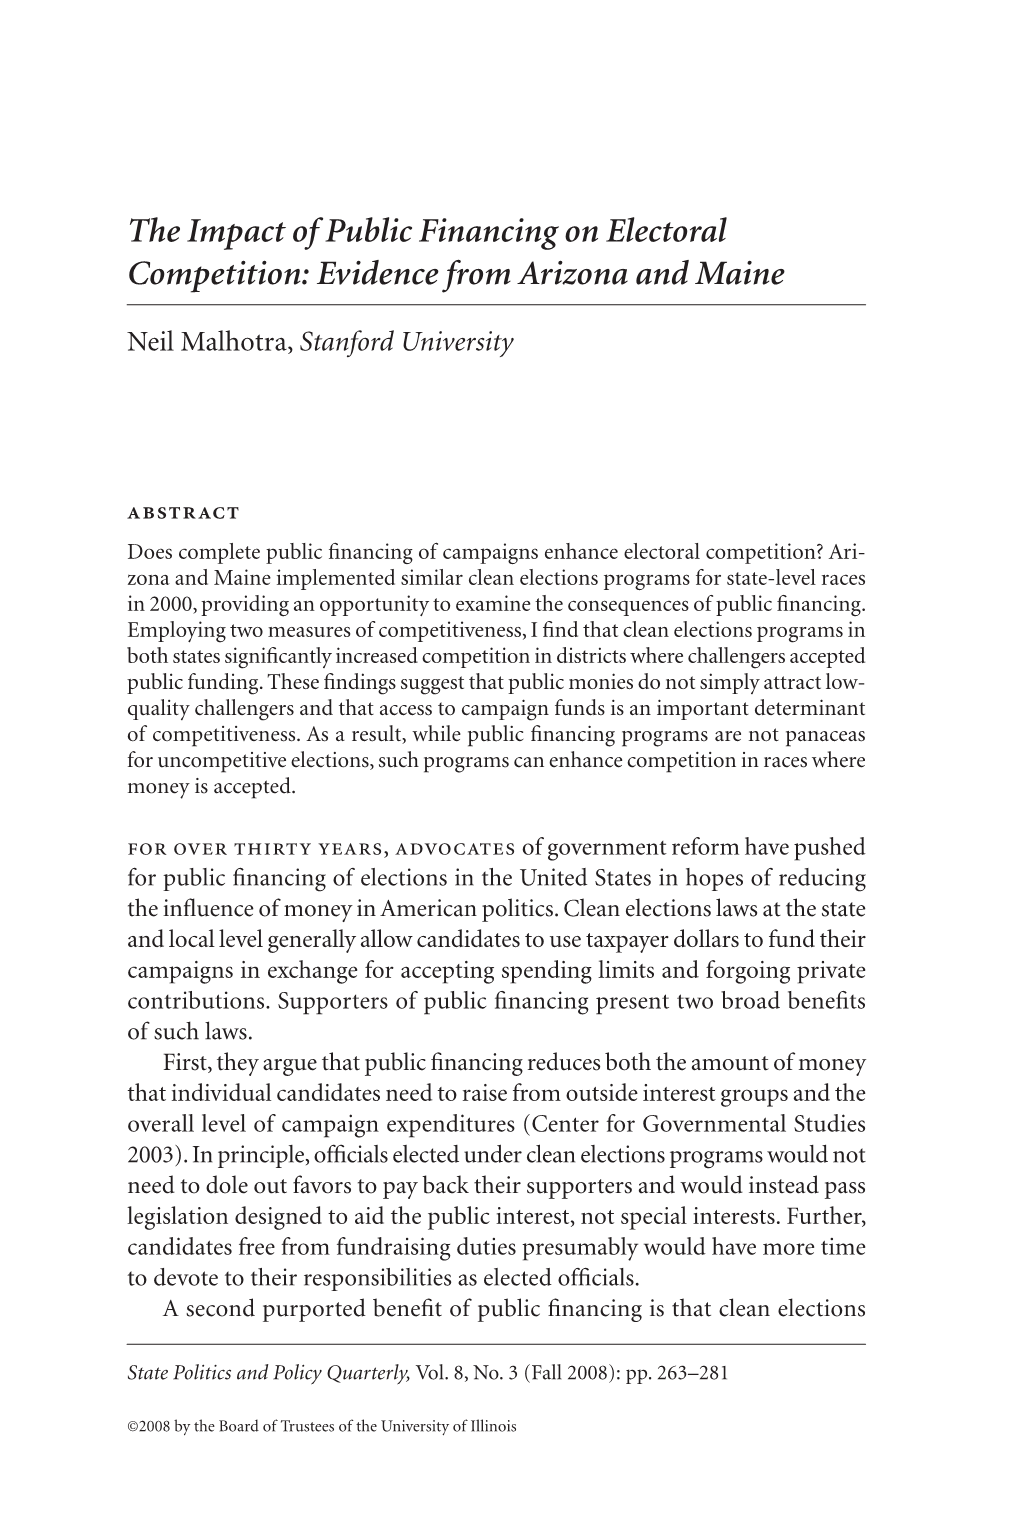 The Impact of Public Financing on Electoral Competition: Evidence from Arizona and Maine